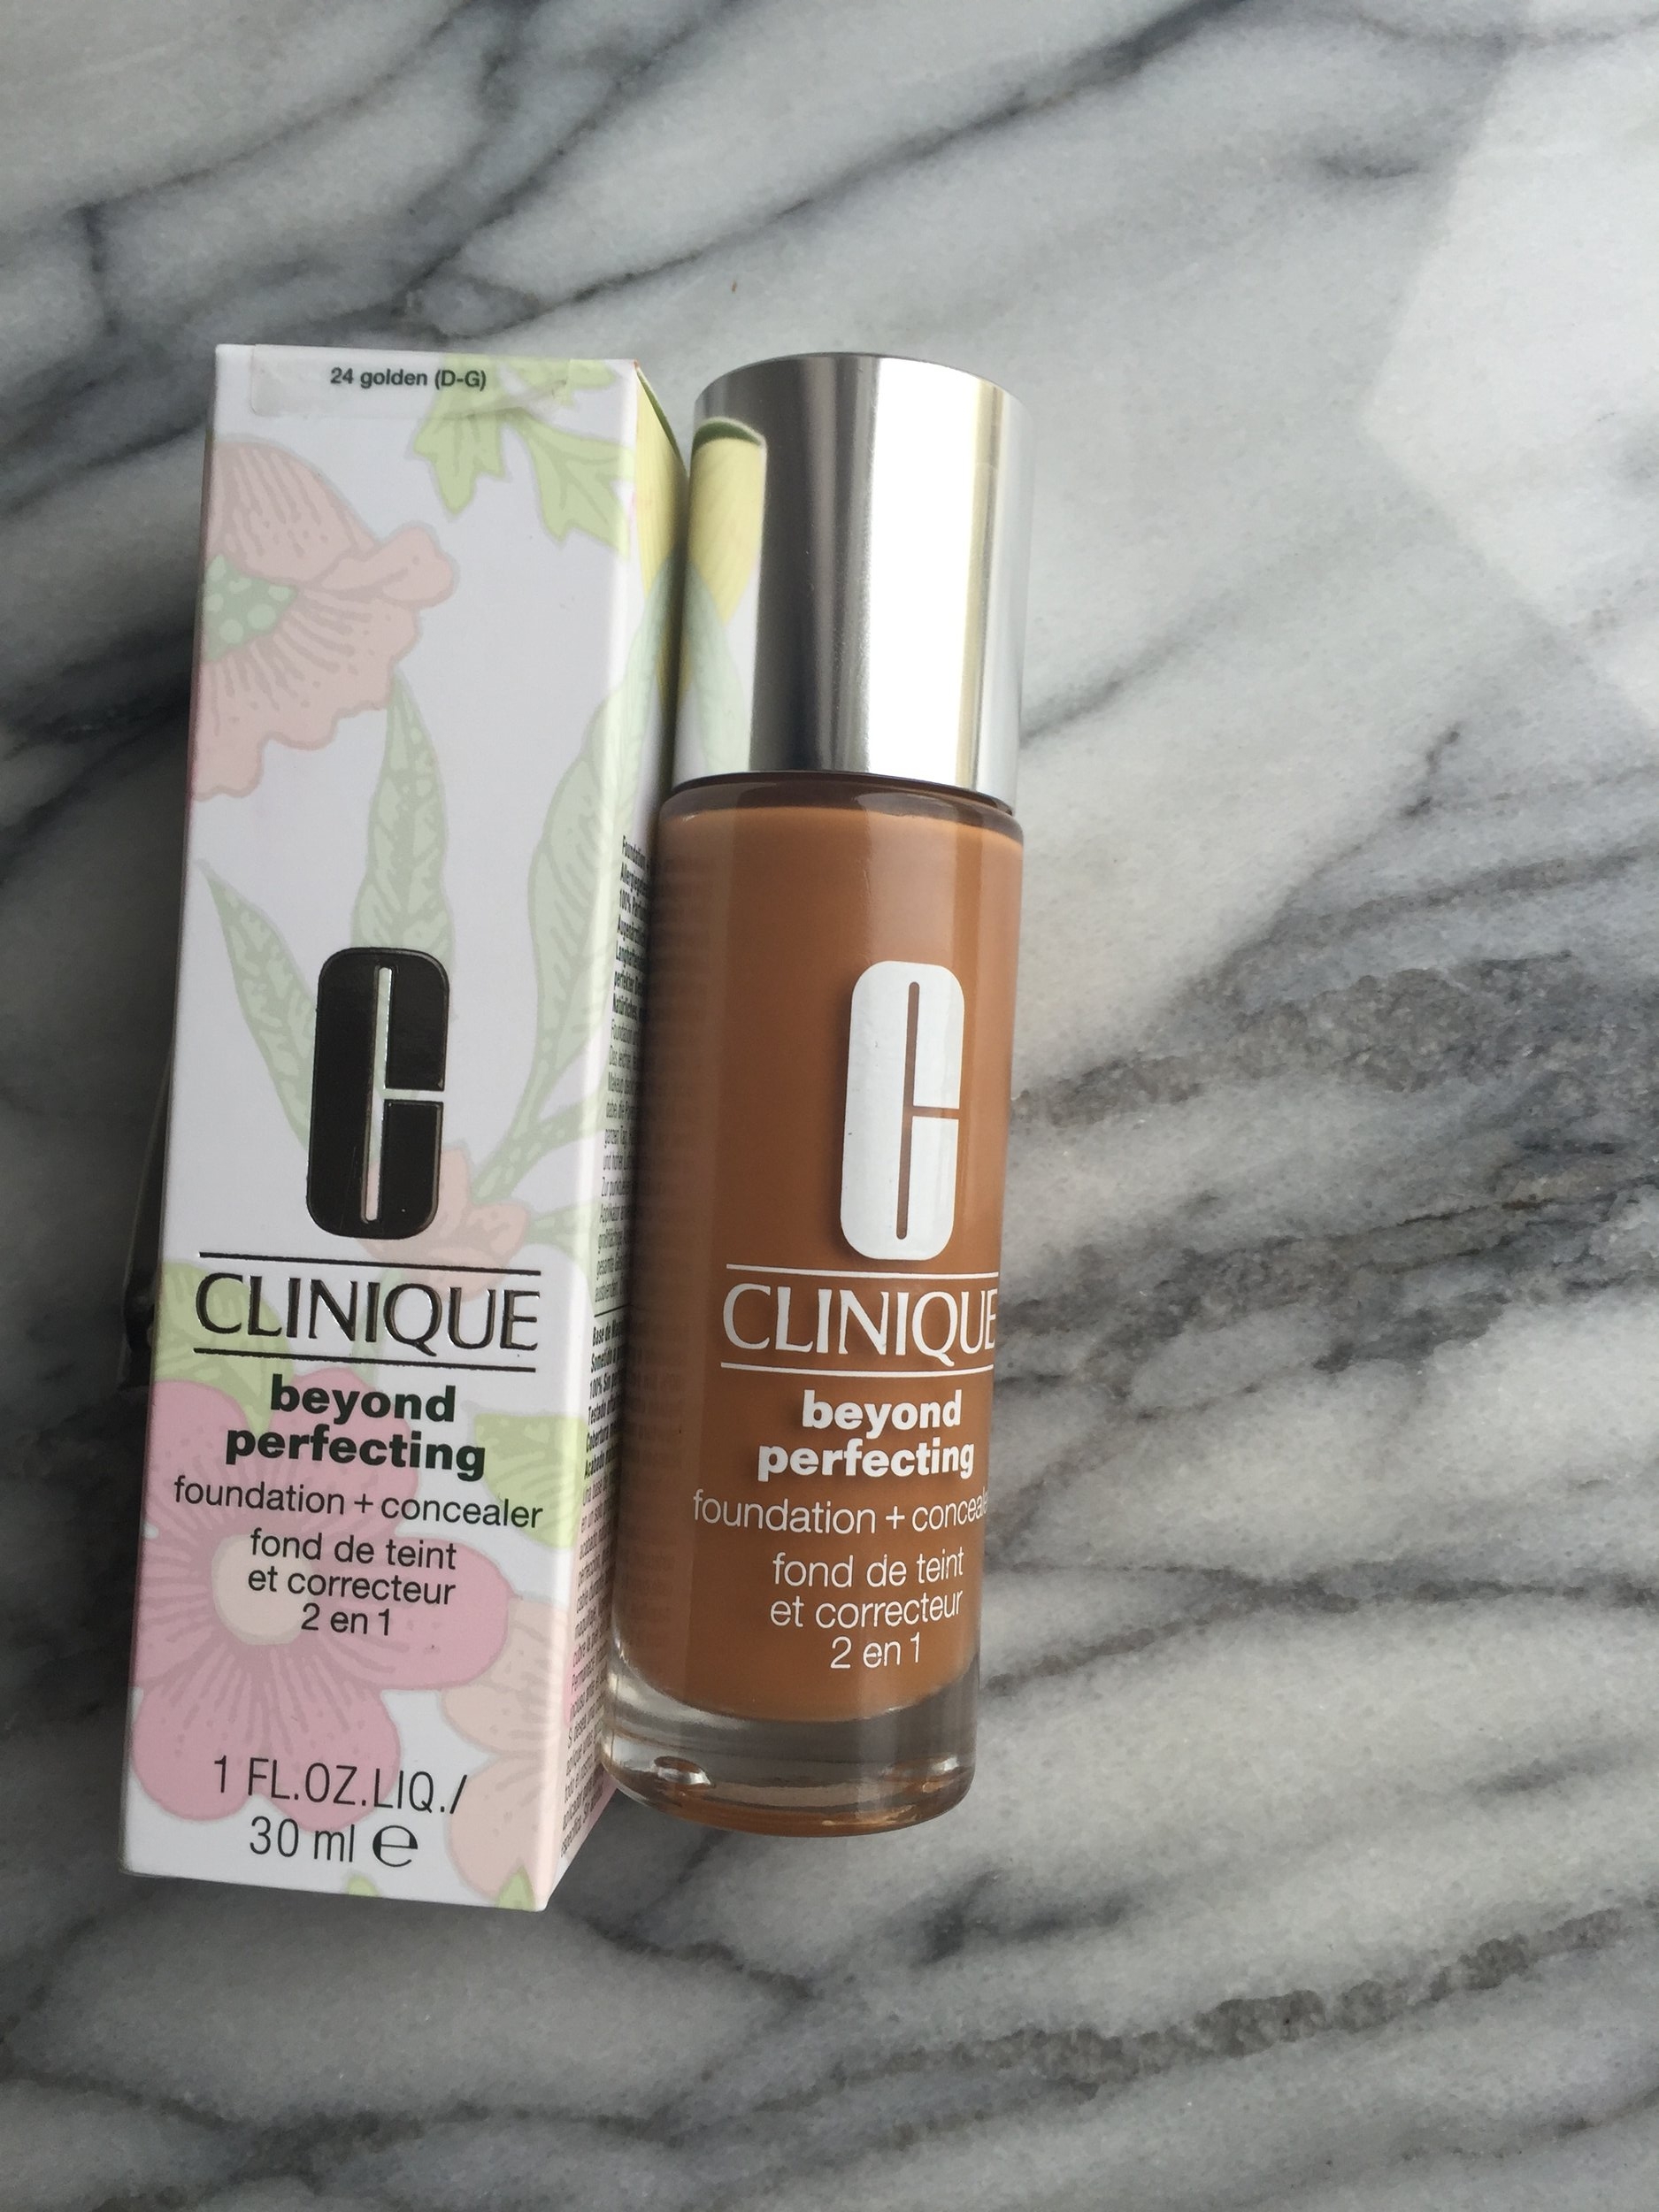 Clinque Beyond Perfecting Foundation + Concealer in 24 Golden